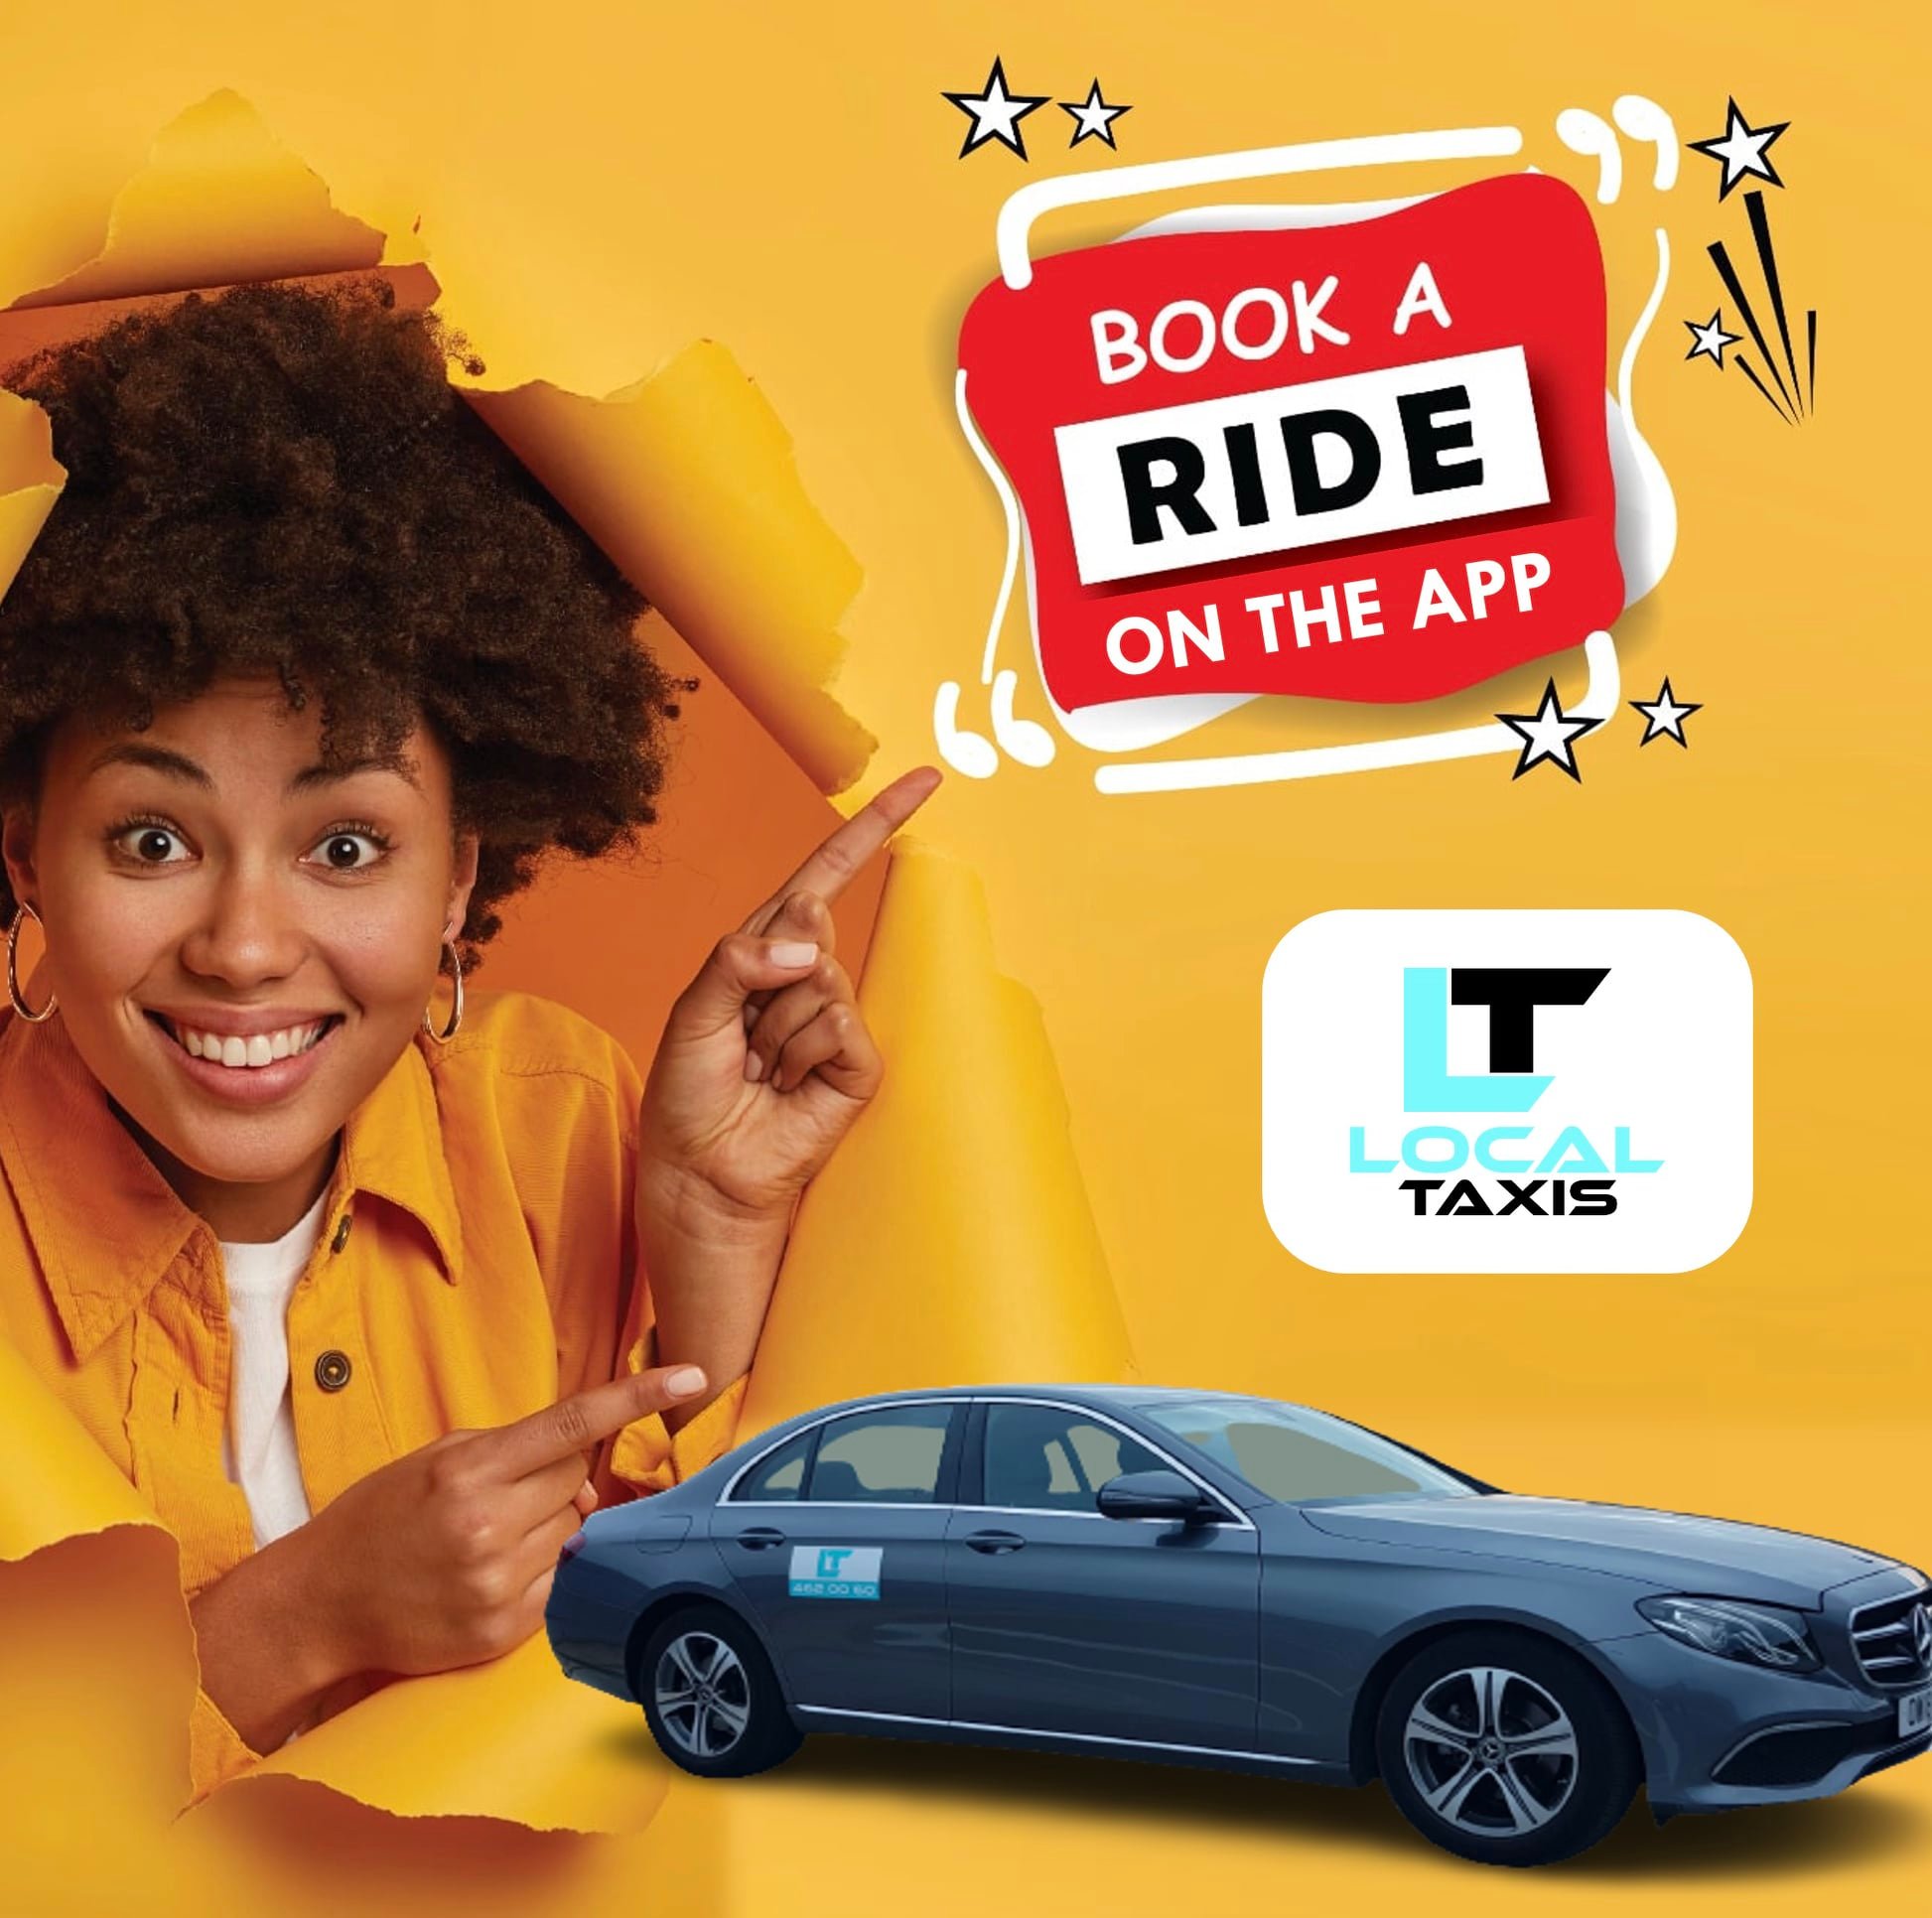 Book a taxi on the app - Local Taxis